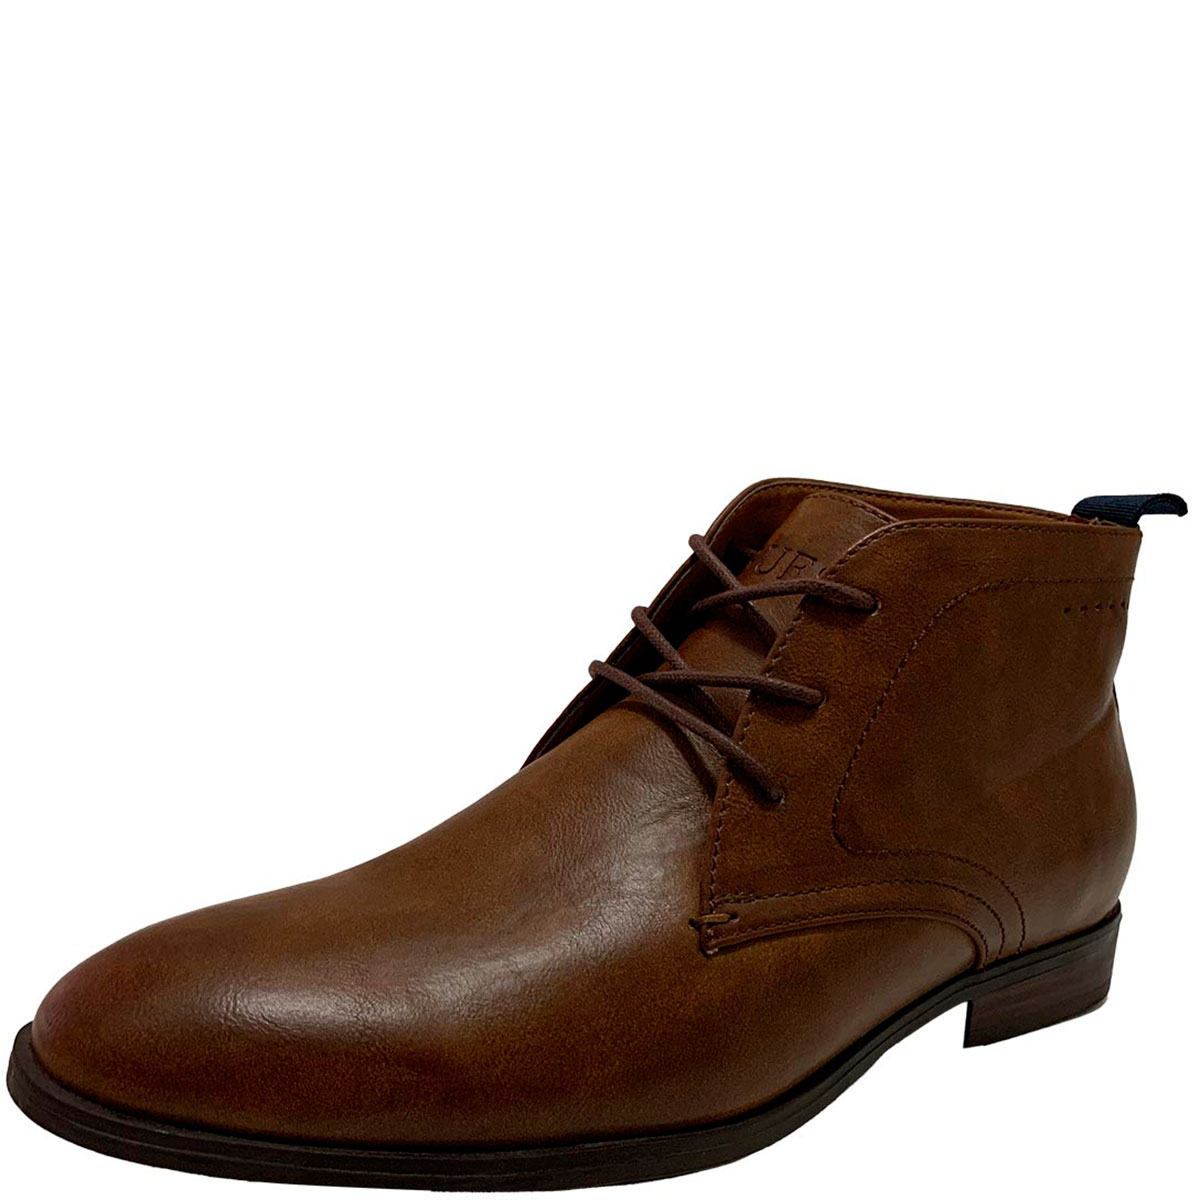 Guess Boots Mens Brown | vlr.eng.br